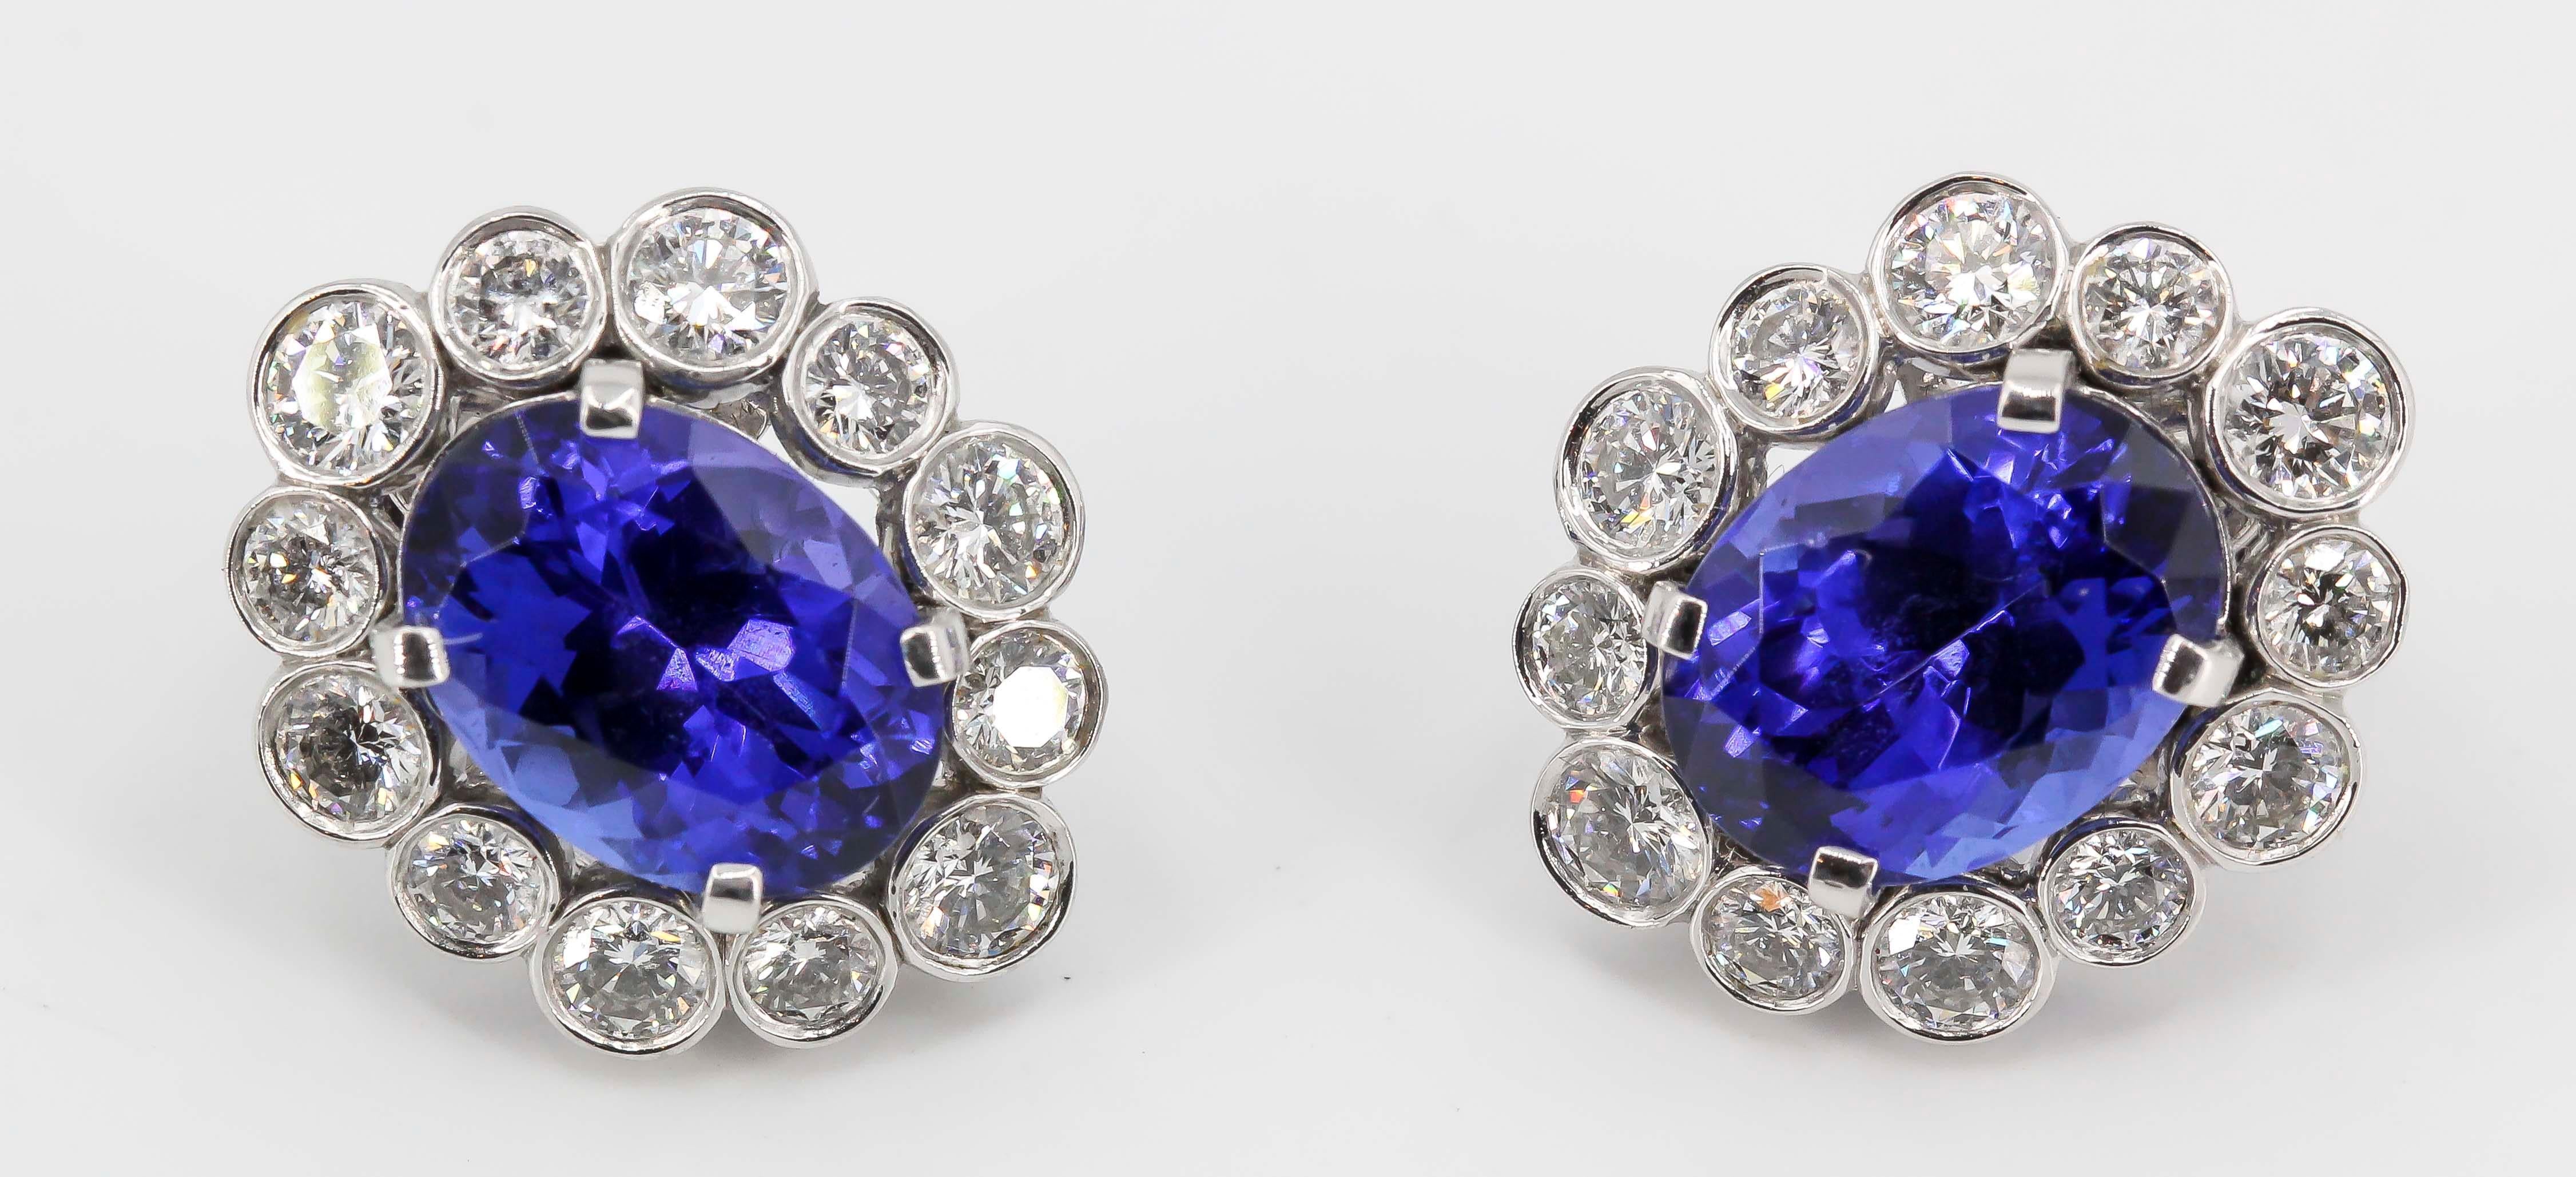 Elegant tanzanite, diamond and platinum earrings by Van Cleef & Arpels, circa 1970s. They feature a large blue tanzanite in the middle, surrounded by high grade round brilliant cut diamonds over a platinum setting. 

Hallmarks: Van Cleef & Arpels,